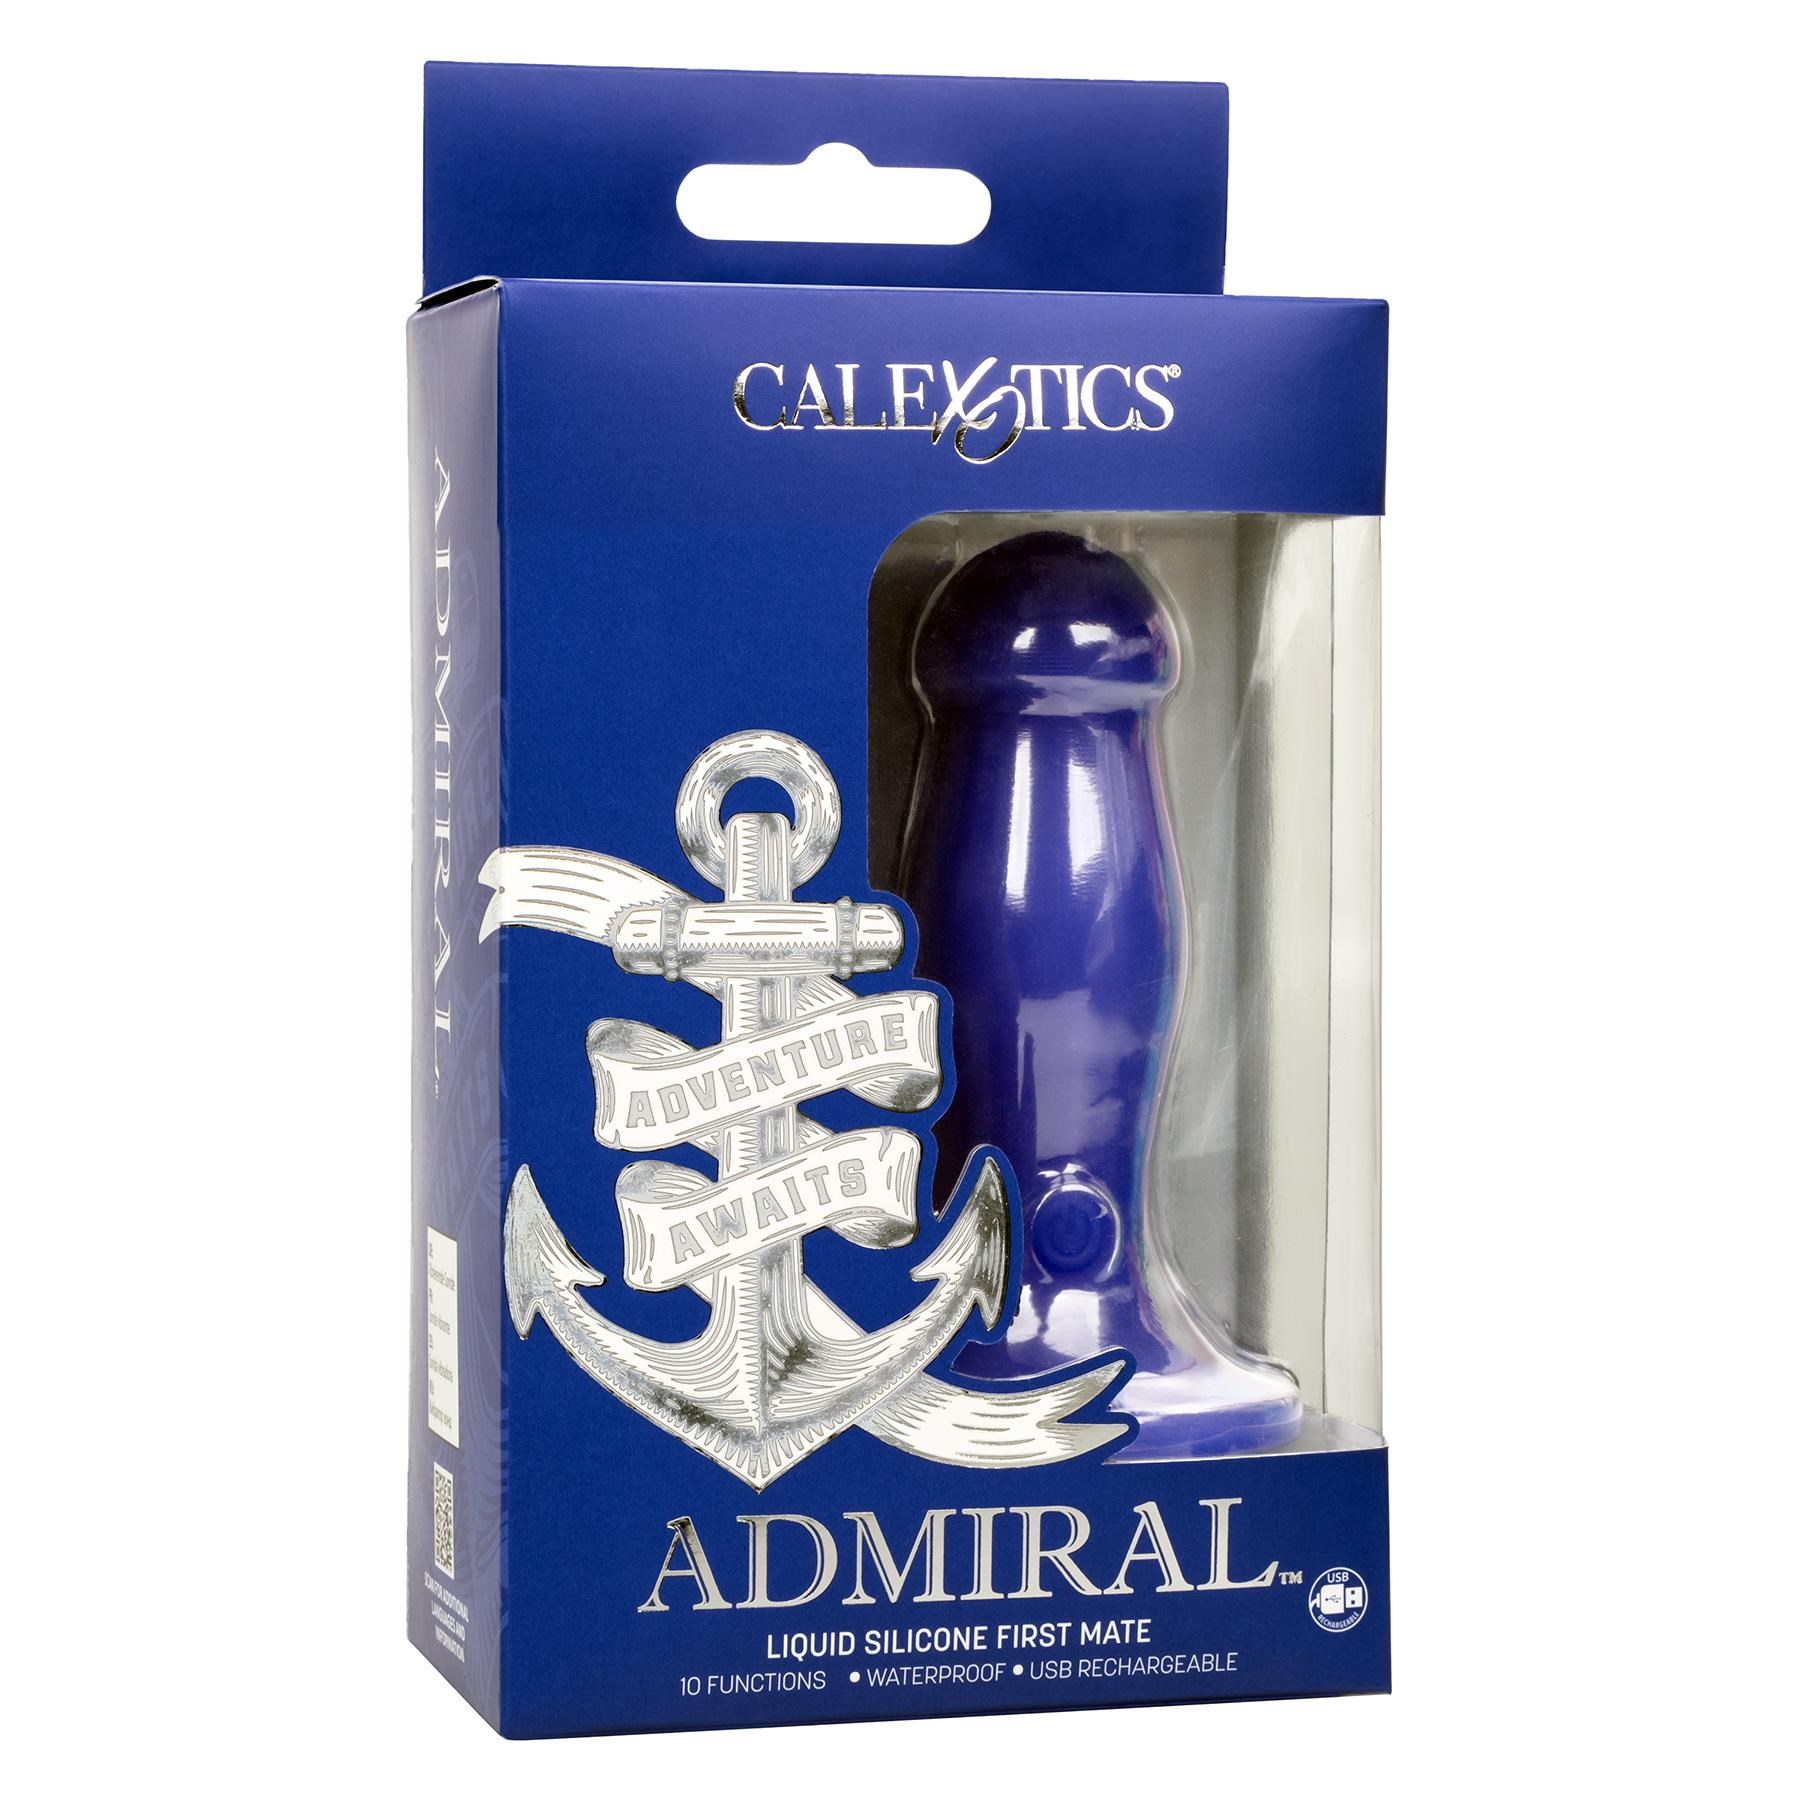 Admiral Liquid Silicone Vibrating First Mate Anal Plug - Packaging